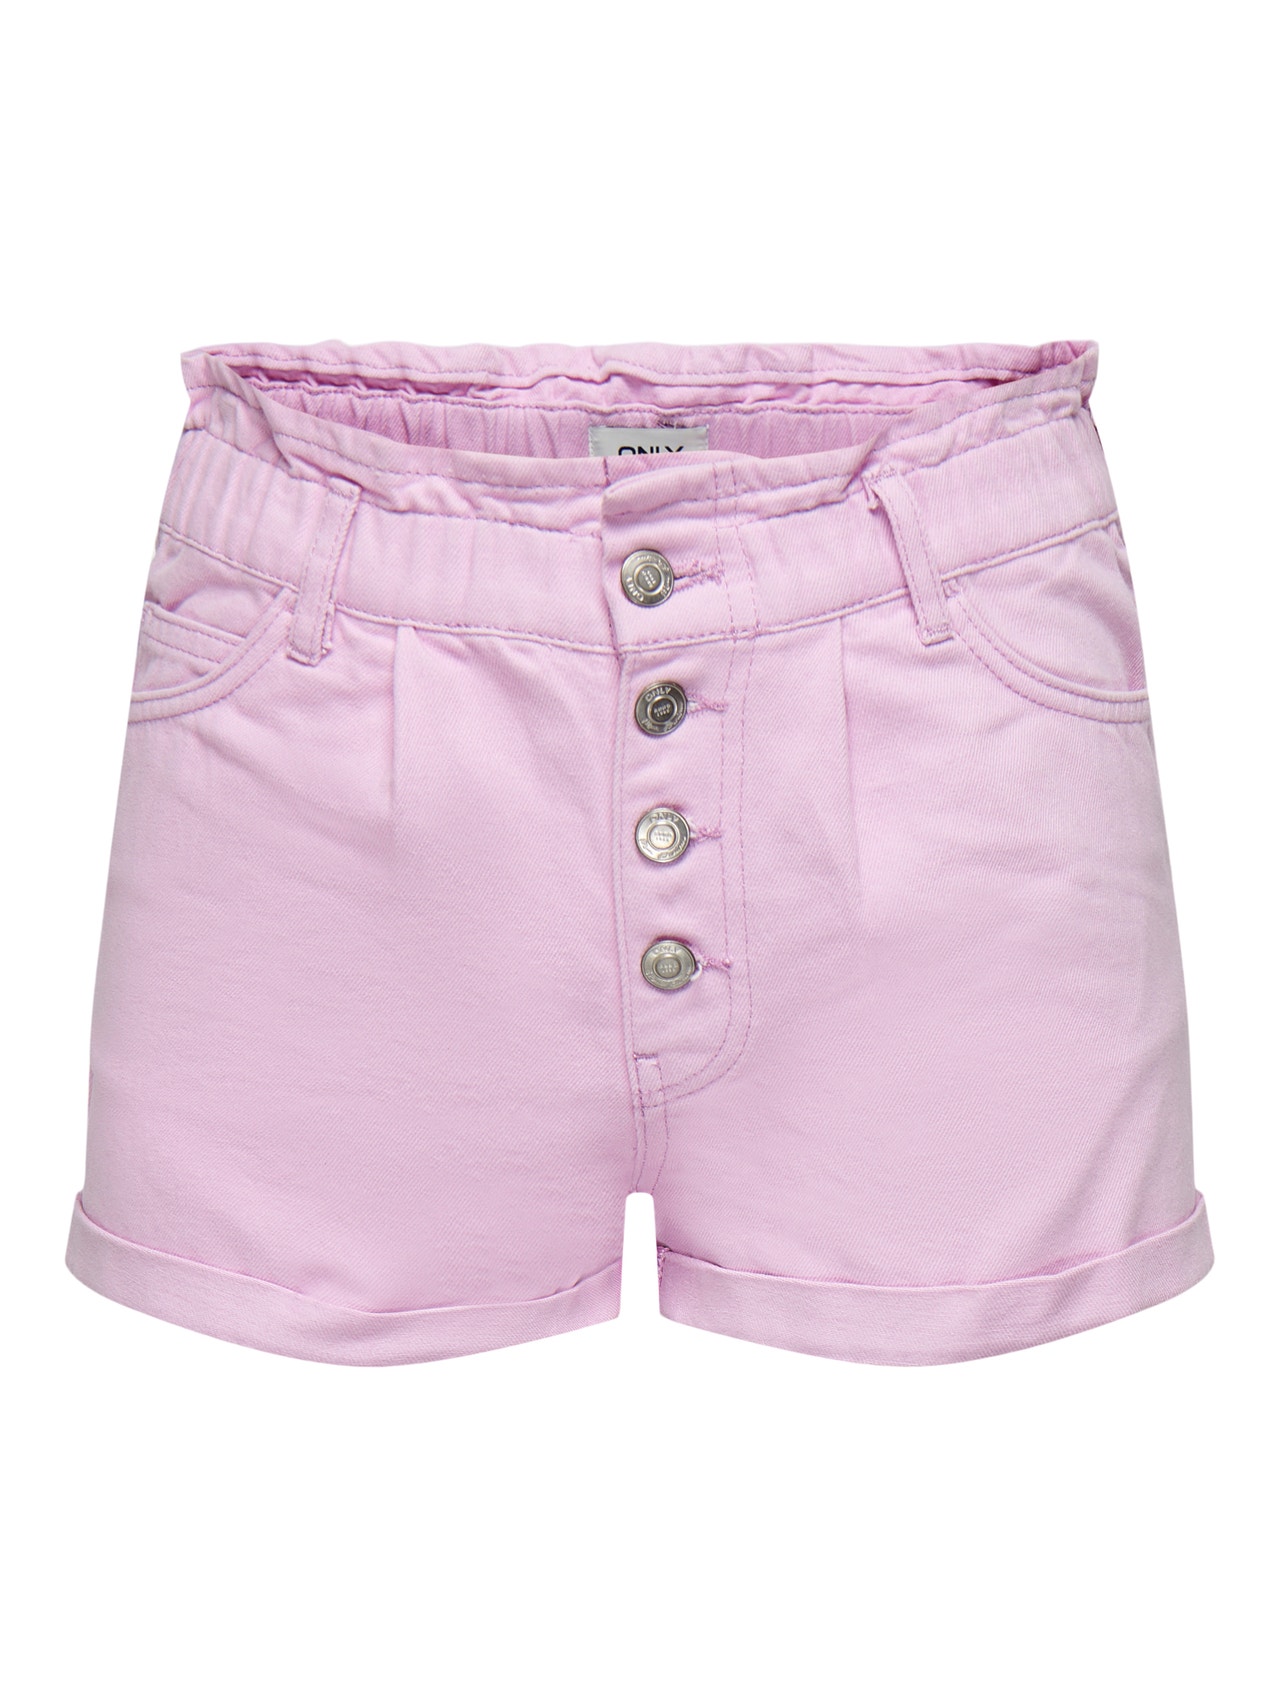 ONLY Relaxed Fit High waist Fold-up hems Shorts -Orchid Bouquet - 15200196